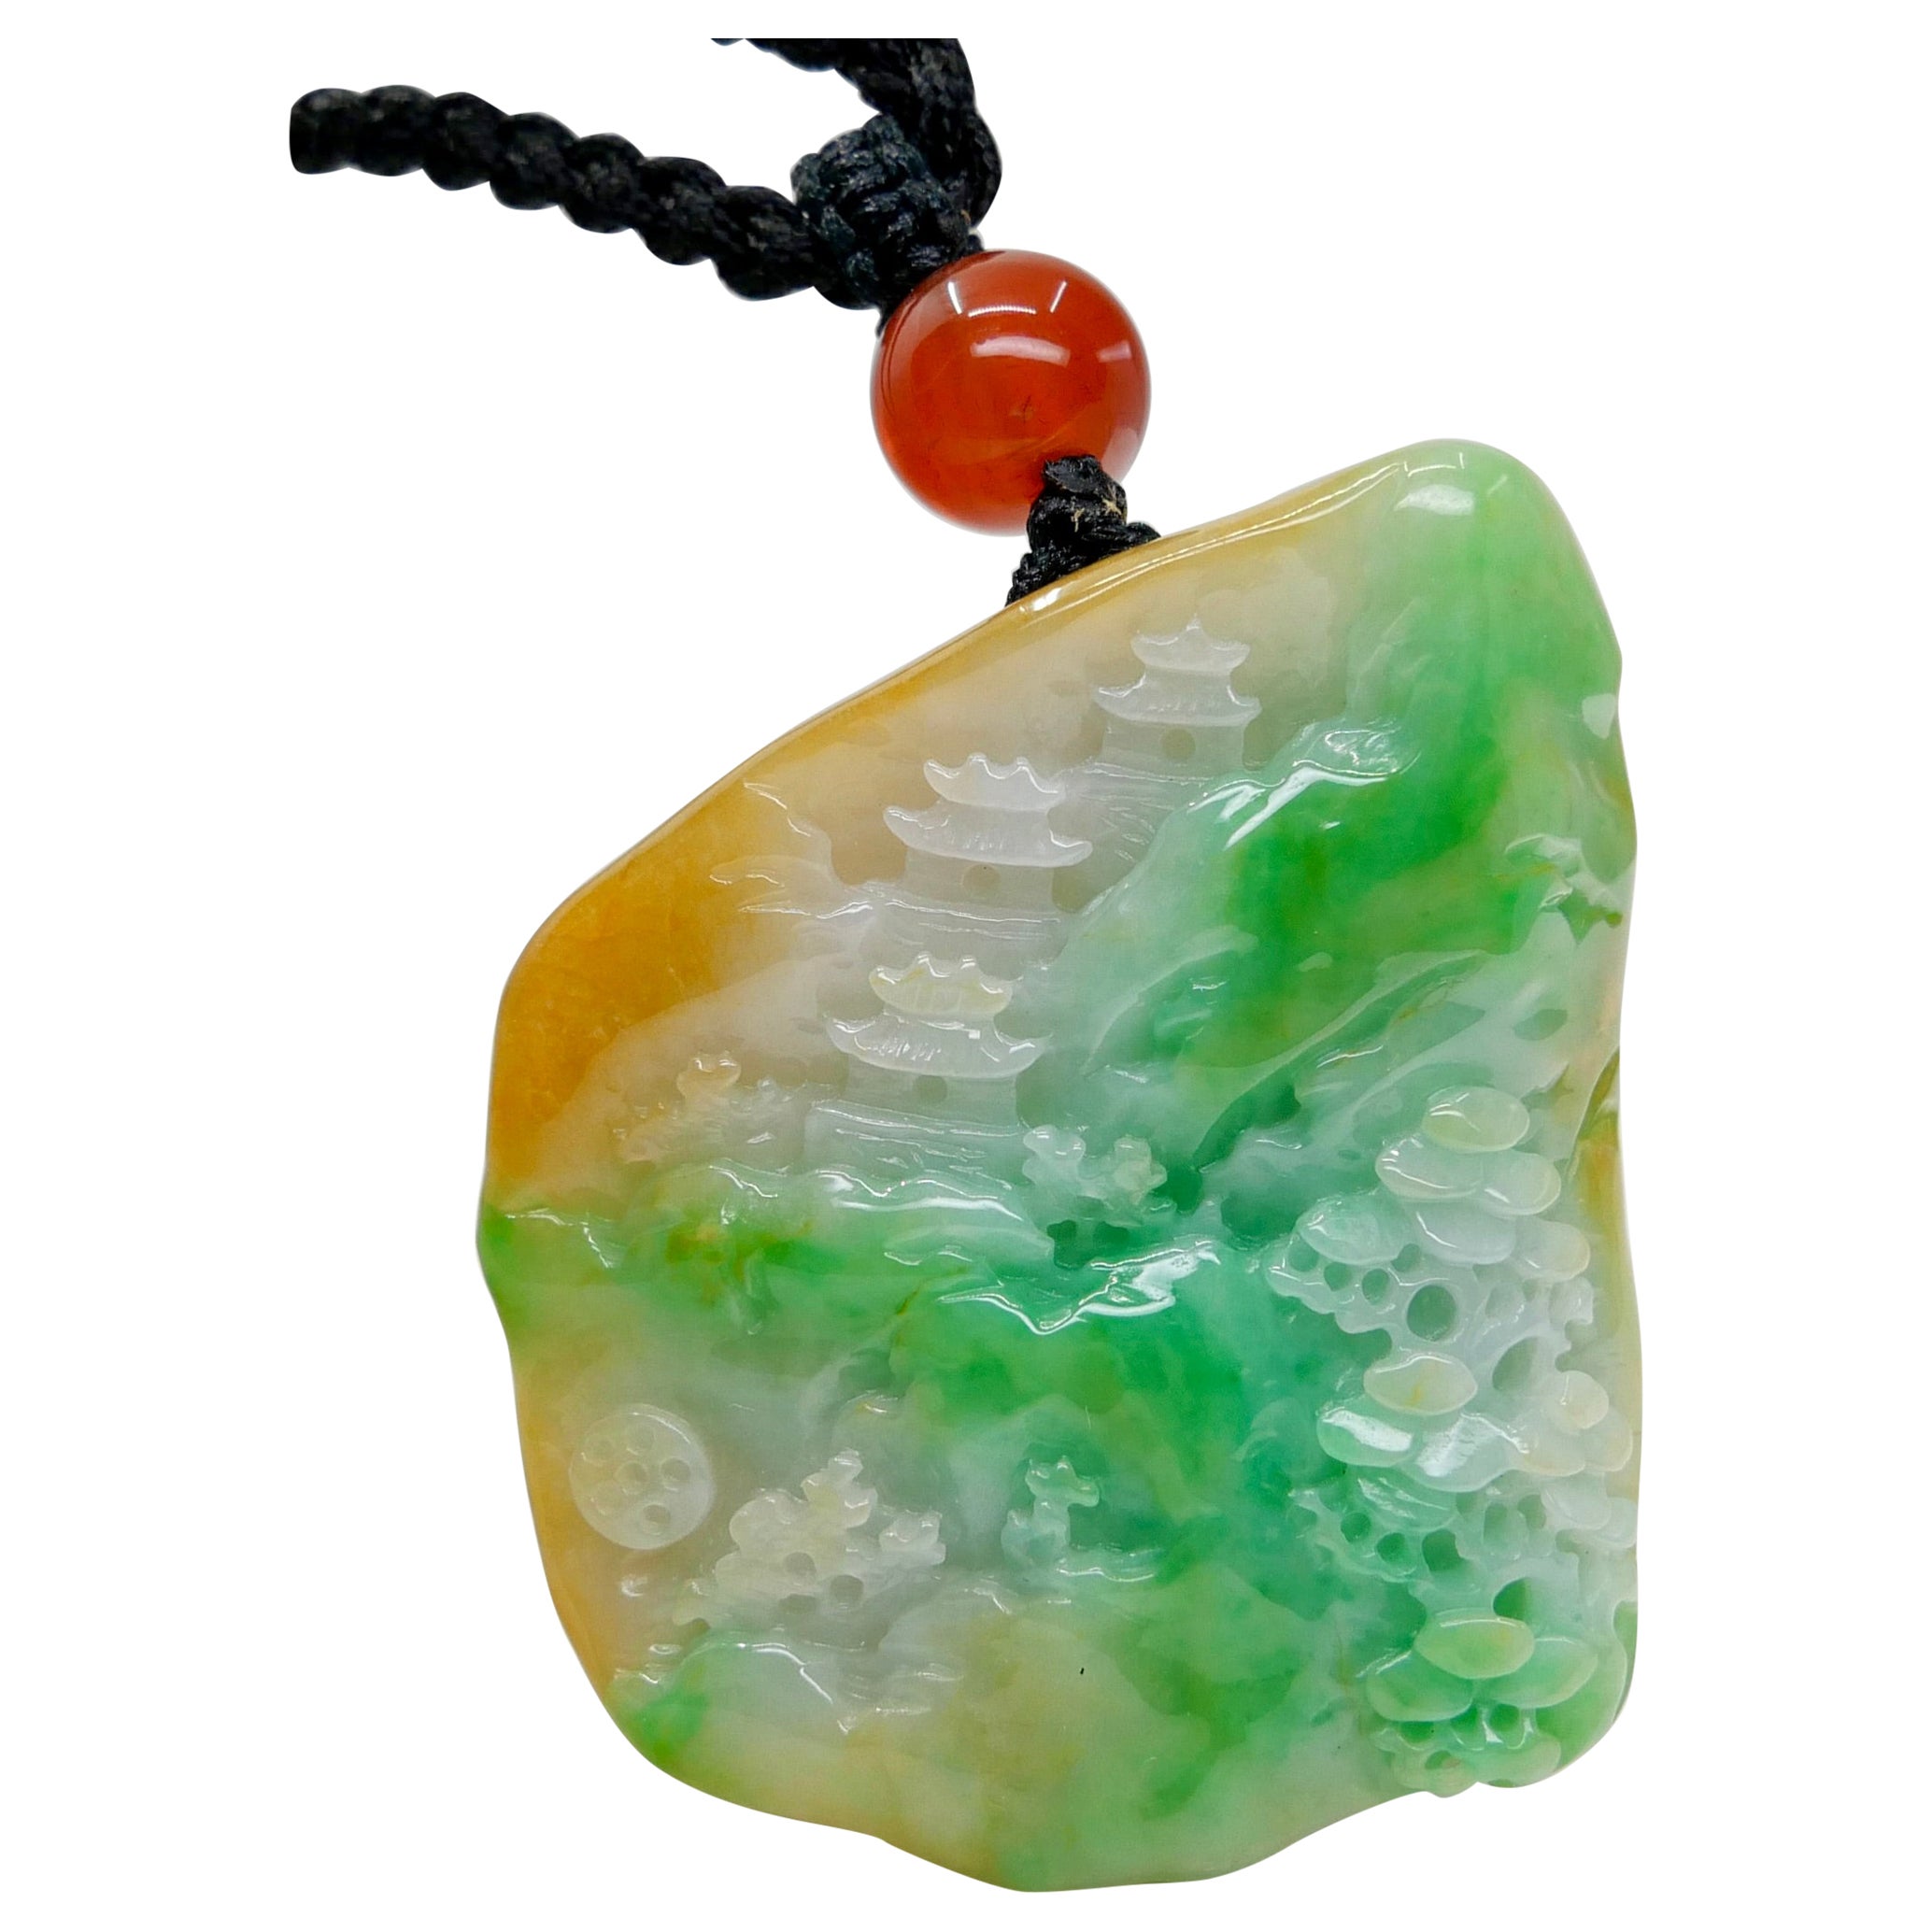 Certified Natural Multi Color Jade & Agate Pendant Necklace Exquisite Carving